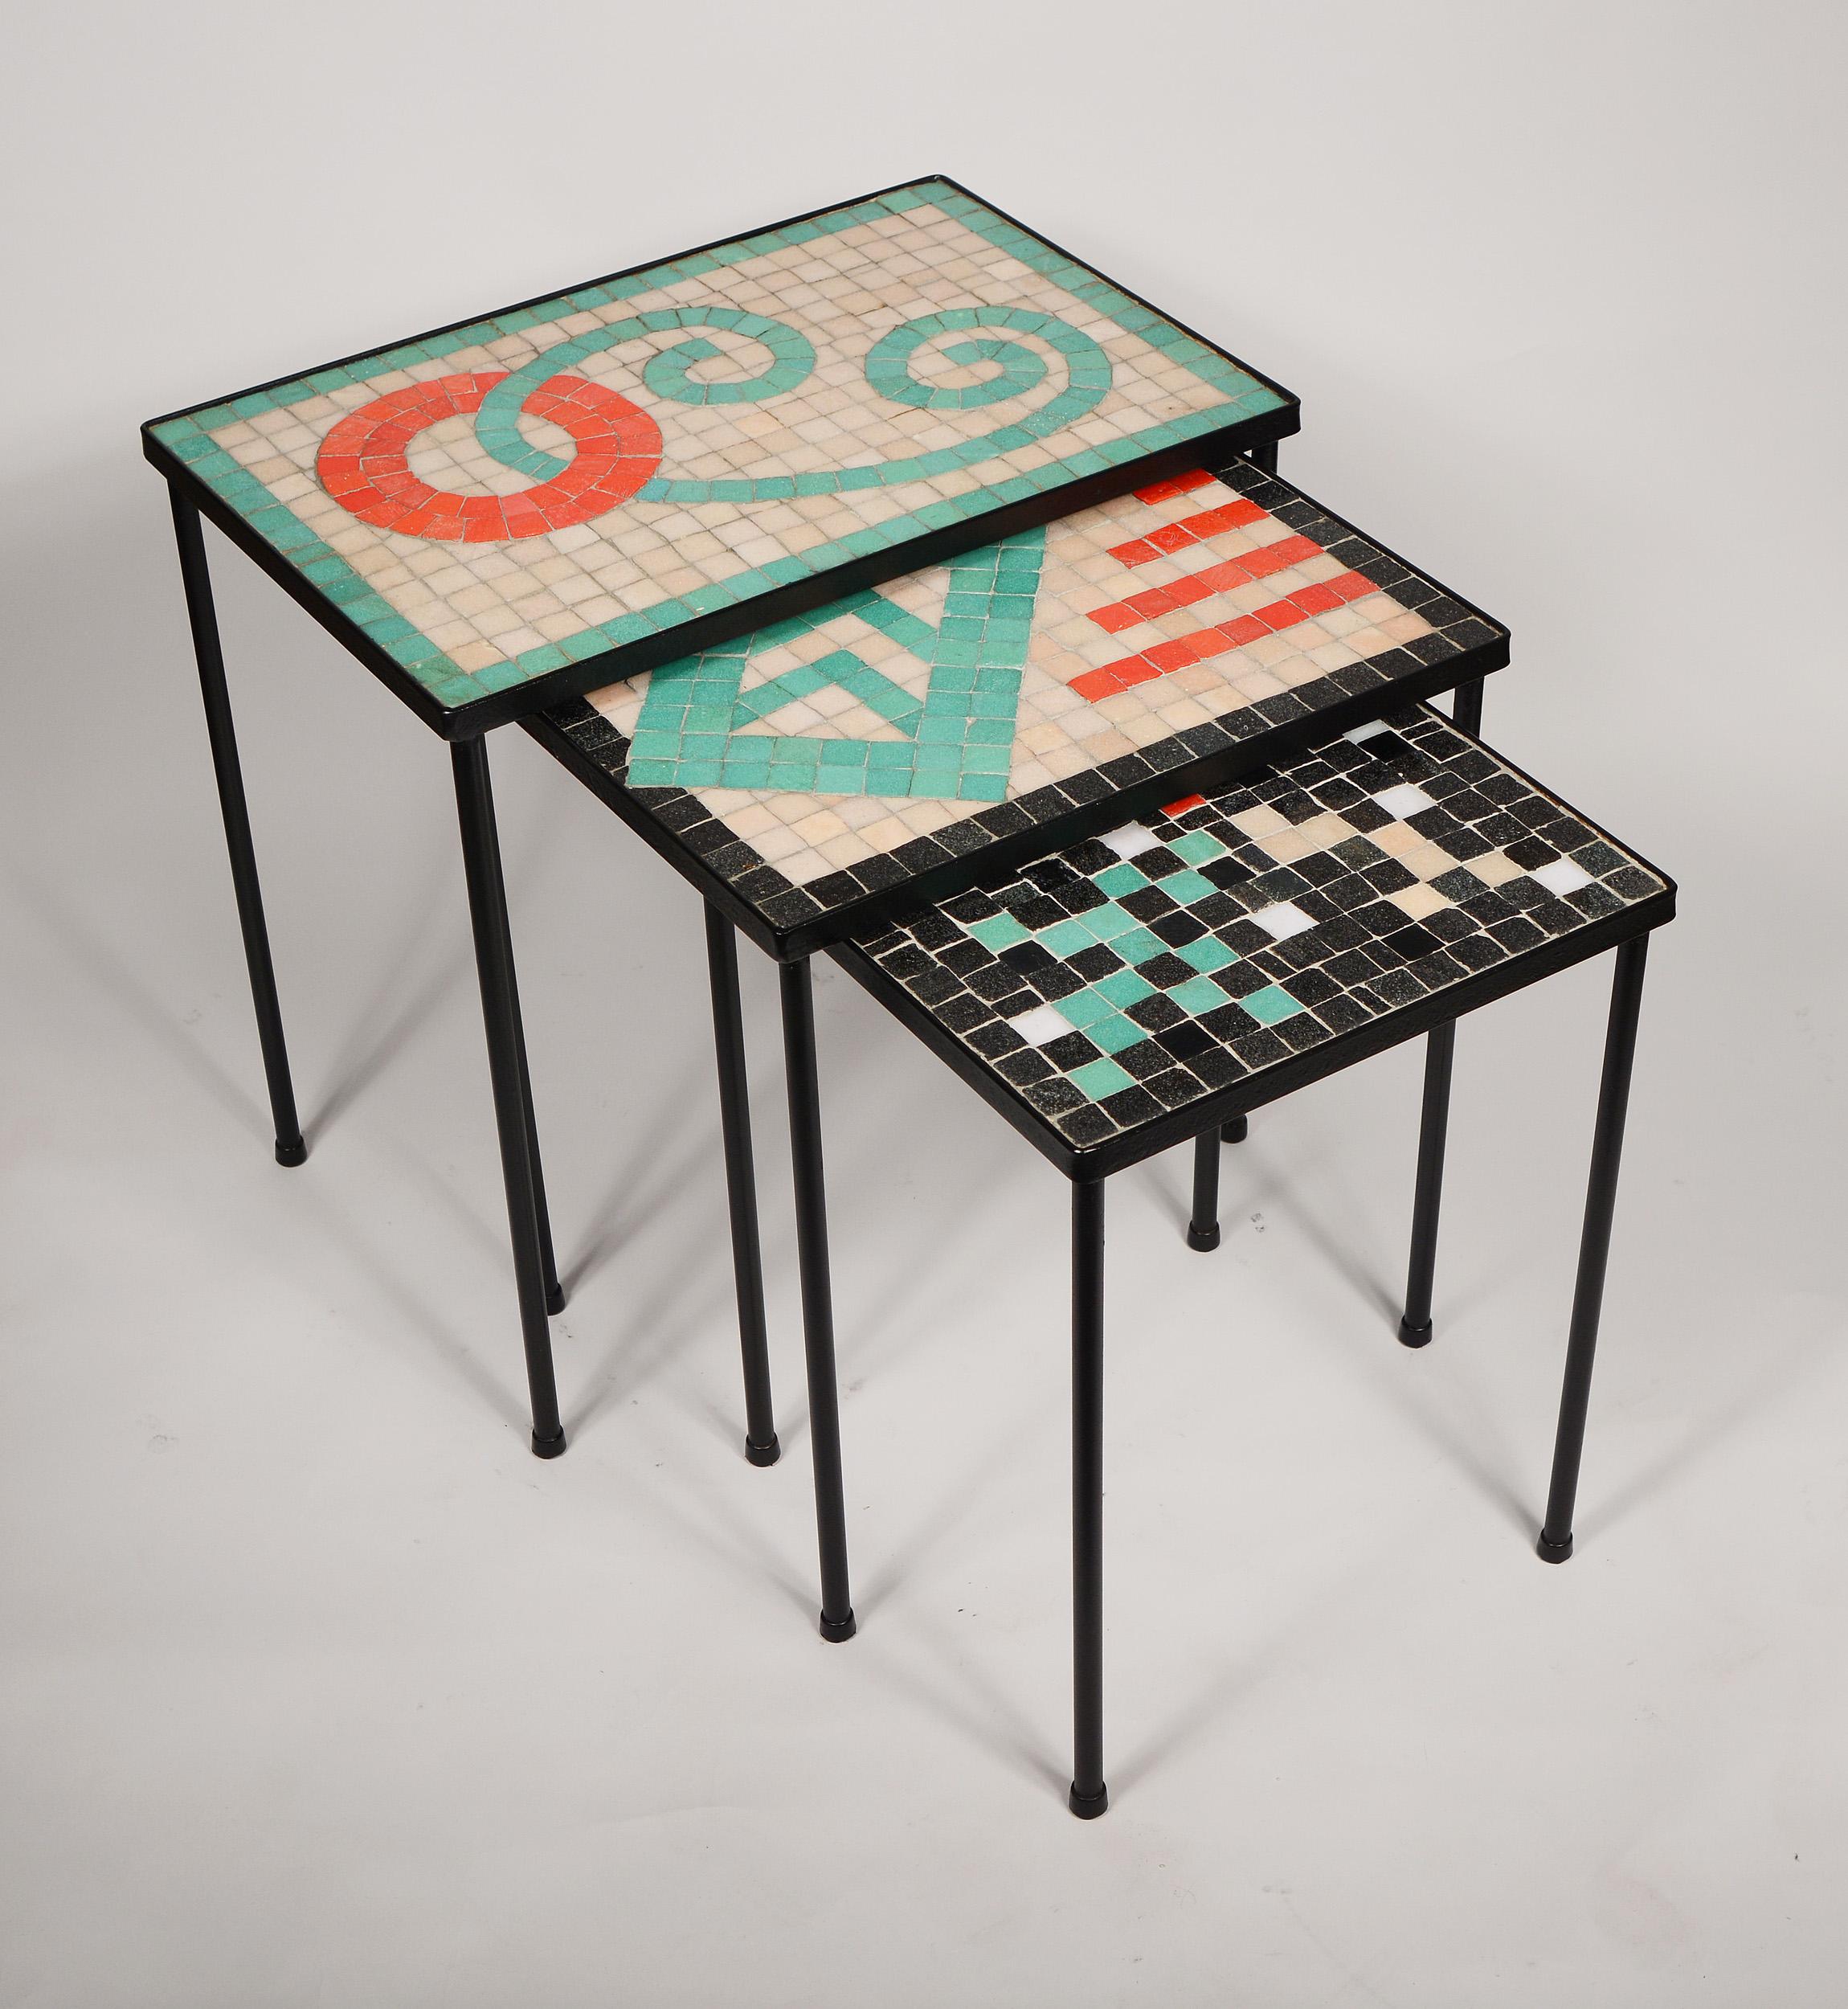 Three small nesting iron tables with mosaic glass tops. The abstract designs on the tops are outstanding. The iron has been repainted. The grout has staining. There are small chips to a few tiles. The large table is 18.25 inches wide, 12.25 inches